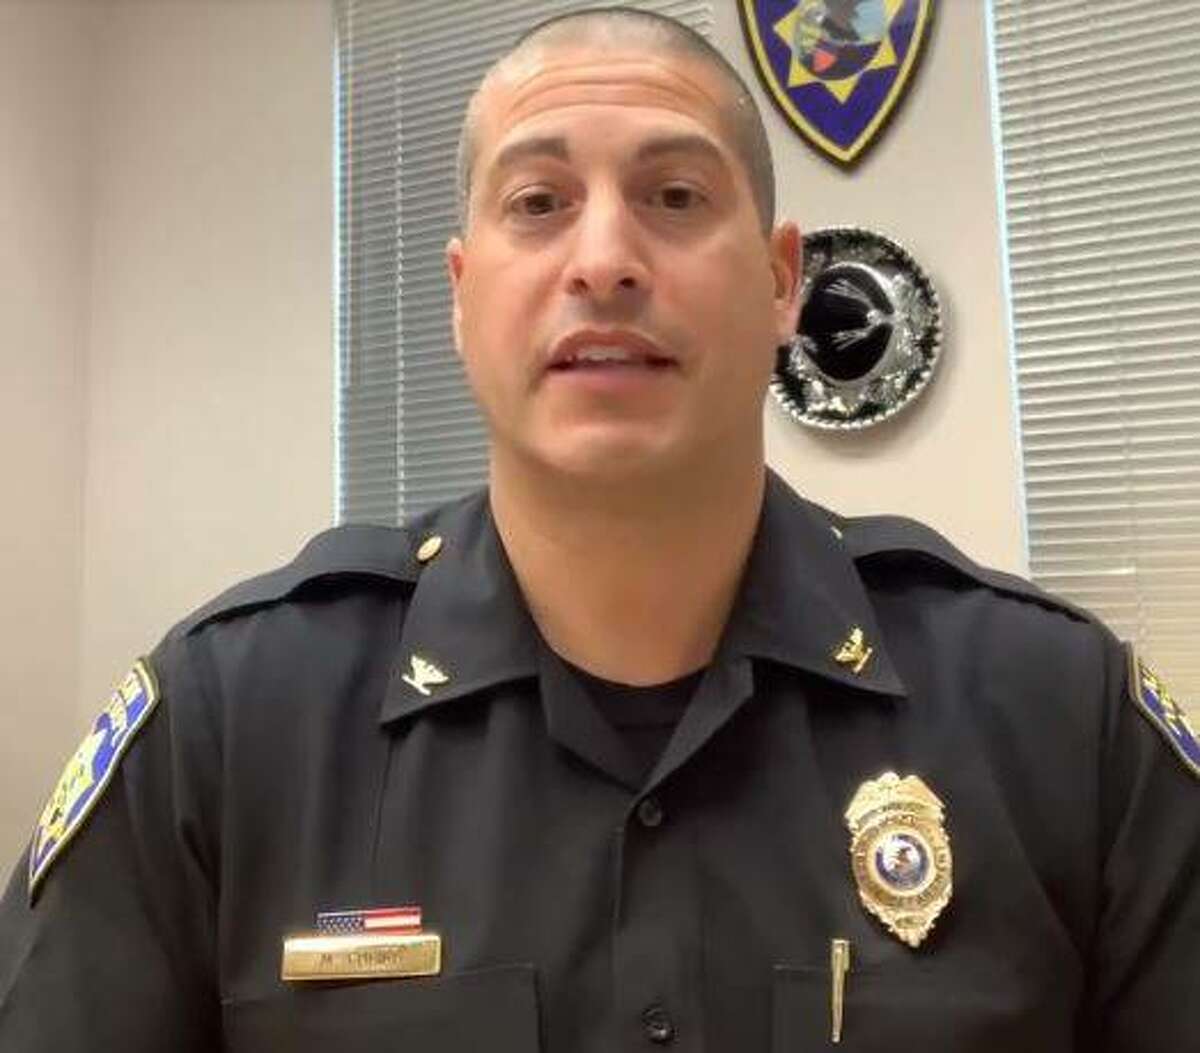 Alton Police Chief Marcos Pulido is now posting videos on Facebook about the department’s organization, resources and members.